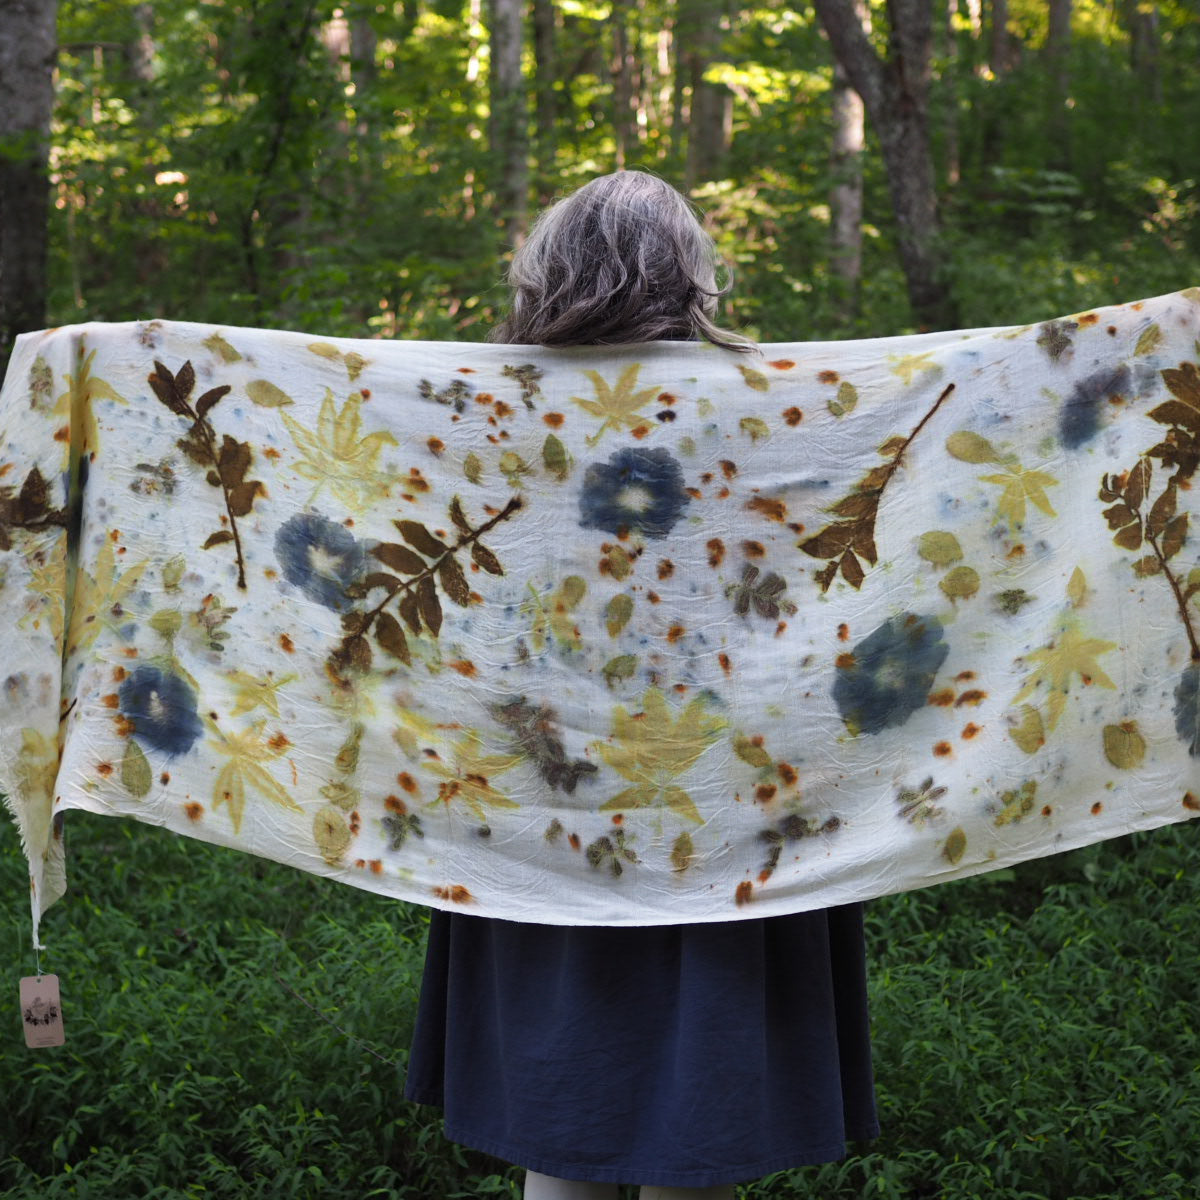 A woman stands in a forest holding open a white woolen shawl ecoprinted with leaves and flowers.